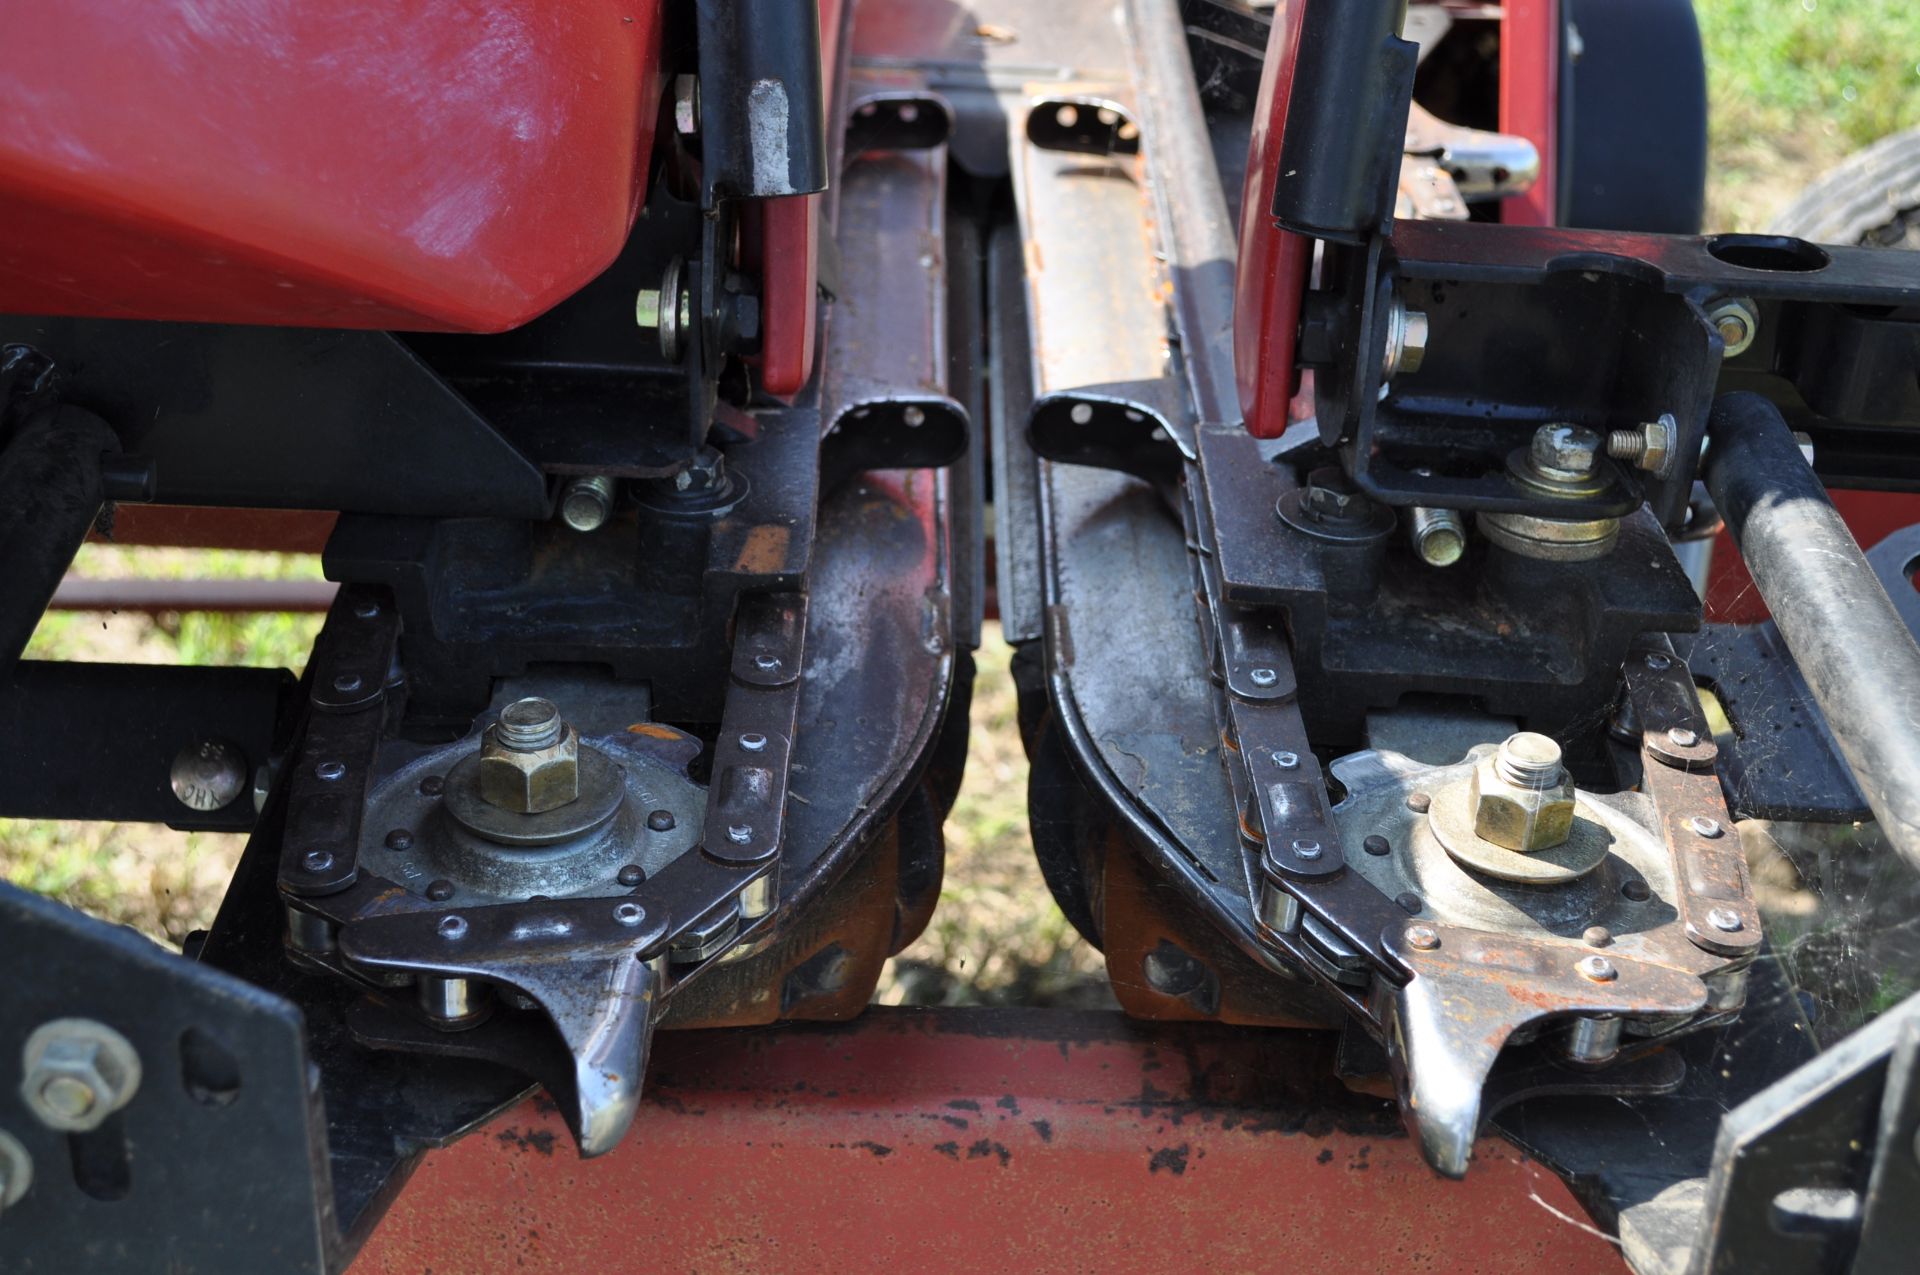 Case IH 3406 corn head, knife rolls, hyd deck plates, poly, 2 stalk stompers, header height control - Image 8 of 20